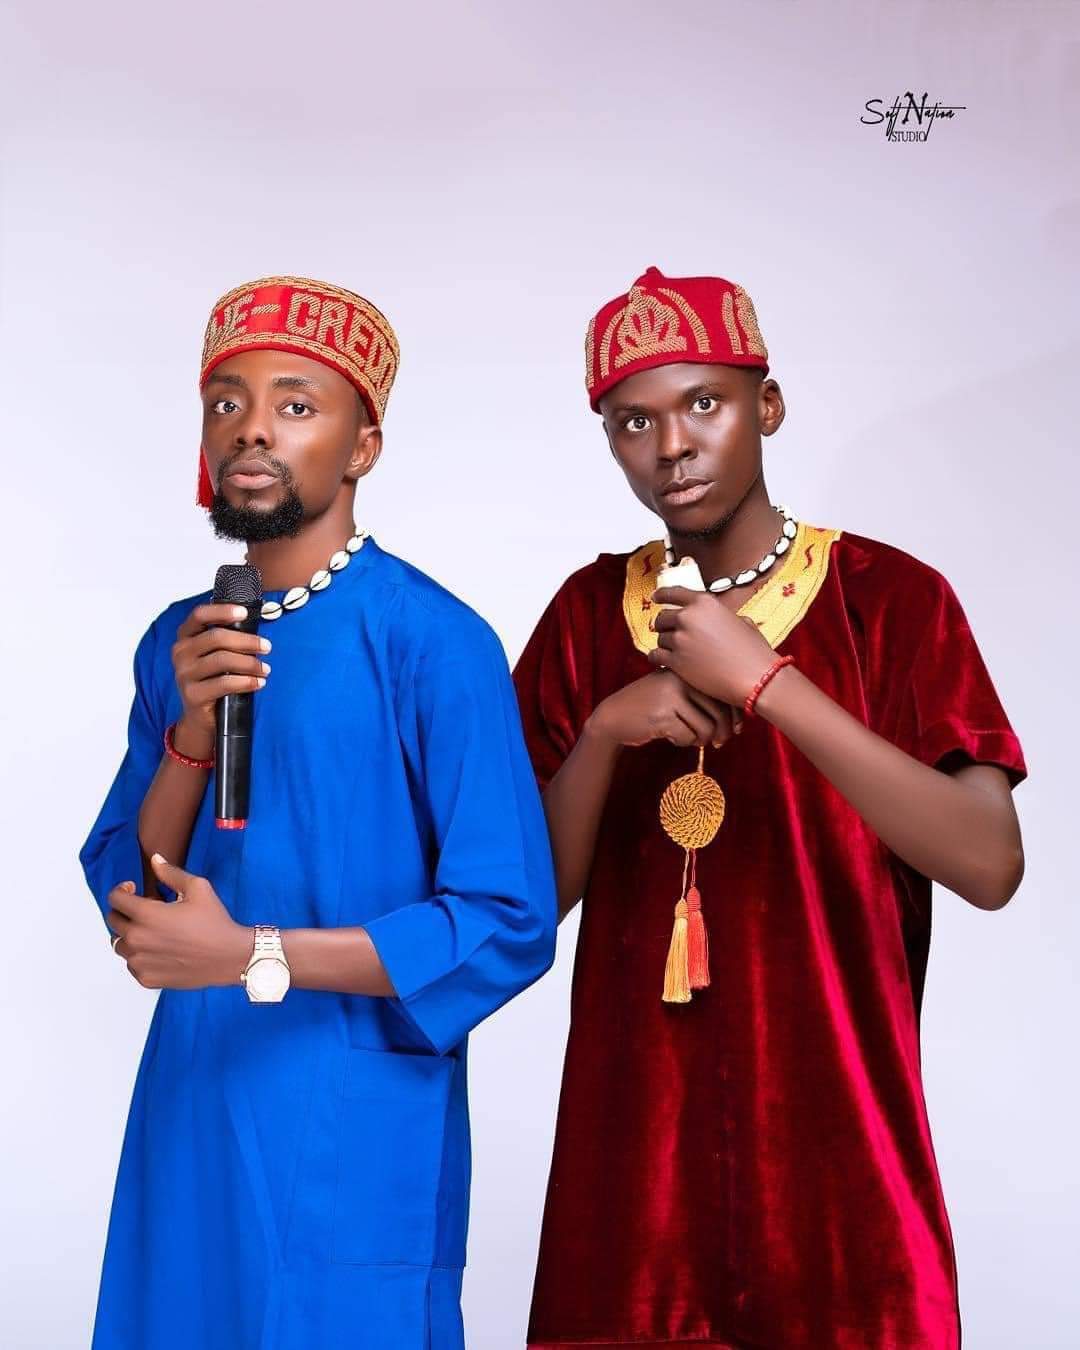 Igwe Credo Introduces New Flute Player Following Ojazzy’s Move to Kcee’s Label